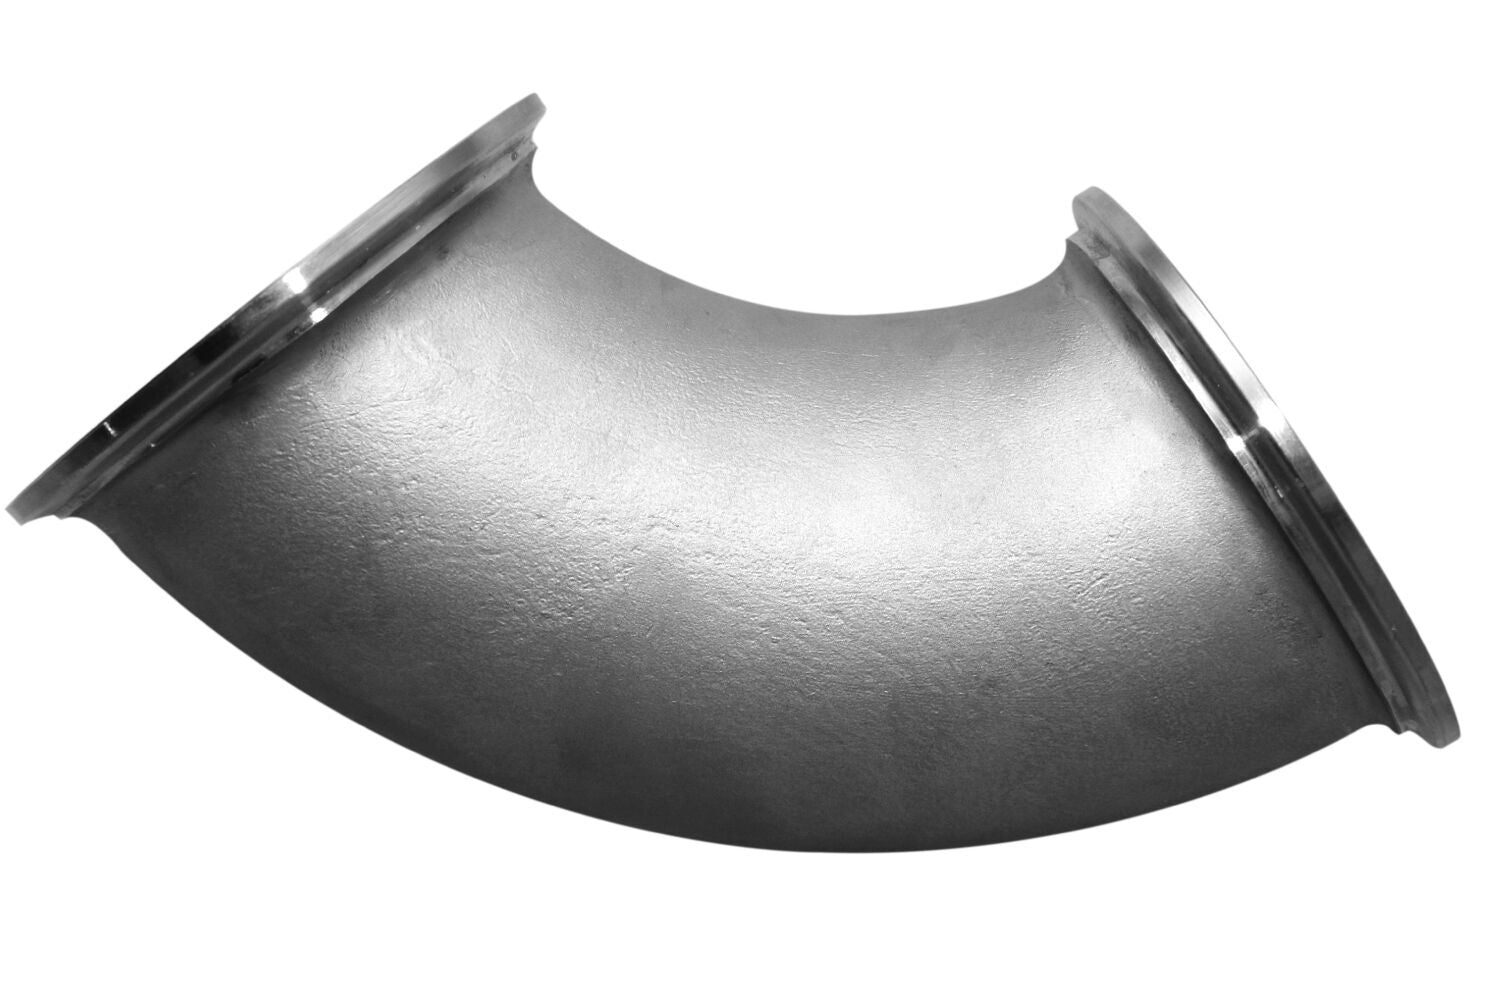 Volvo Penta 3829021 Stainless Steel Bend Elbow Replacement HOT 7